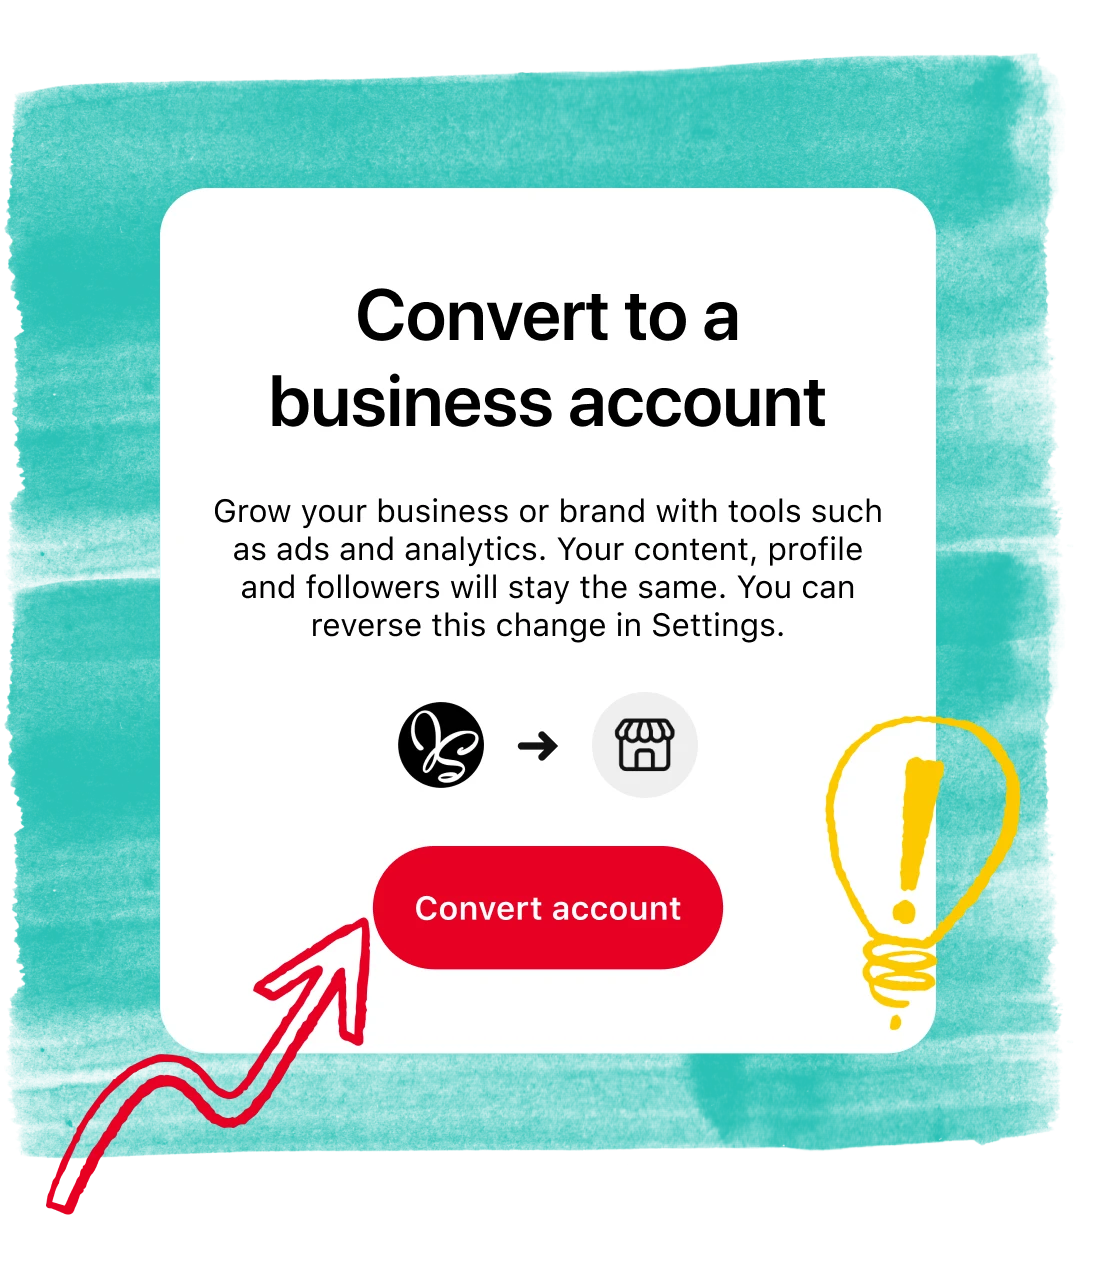 Pinterest app screen showing how to convert to a business account